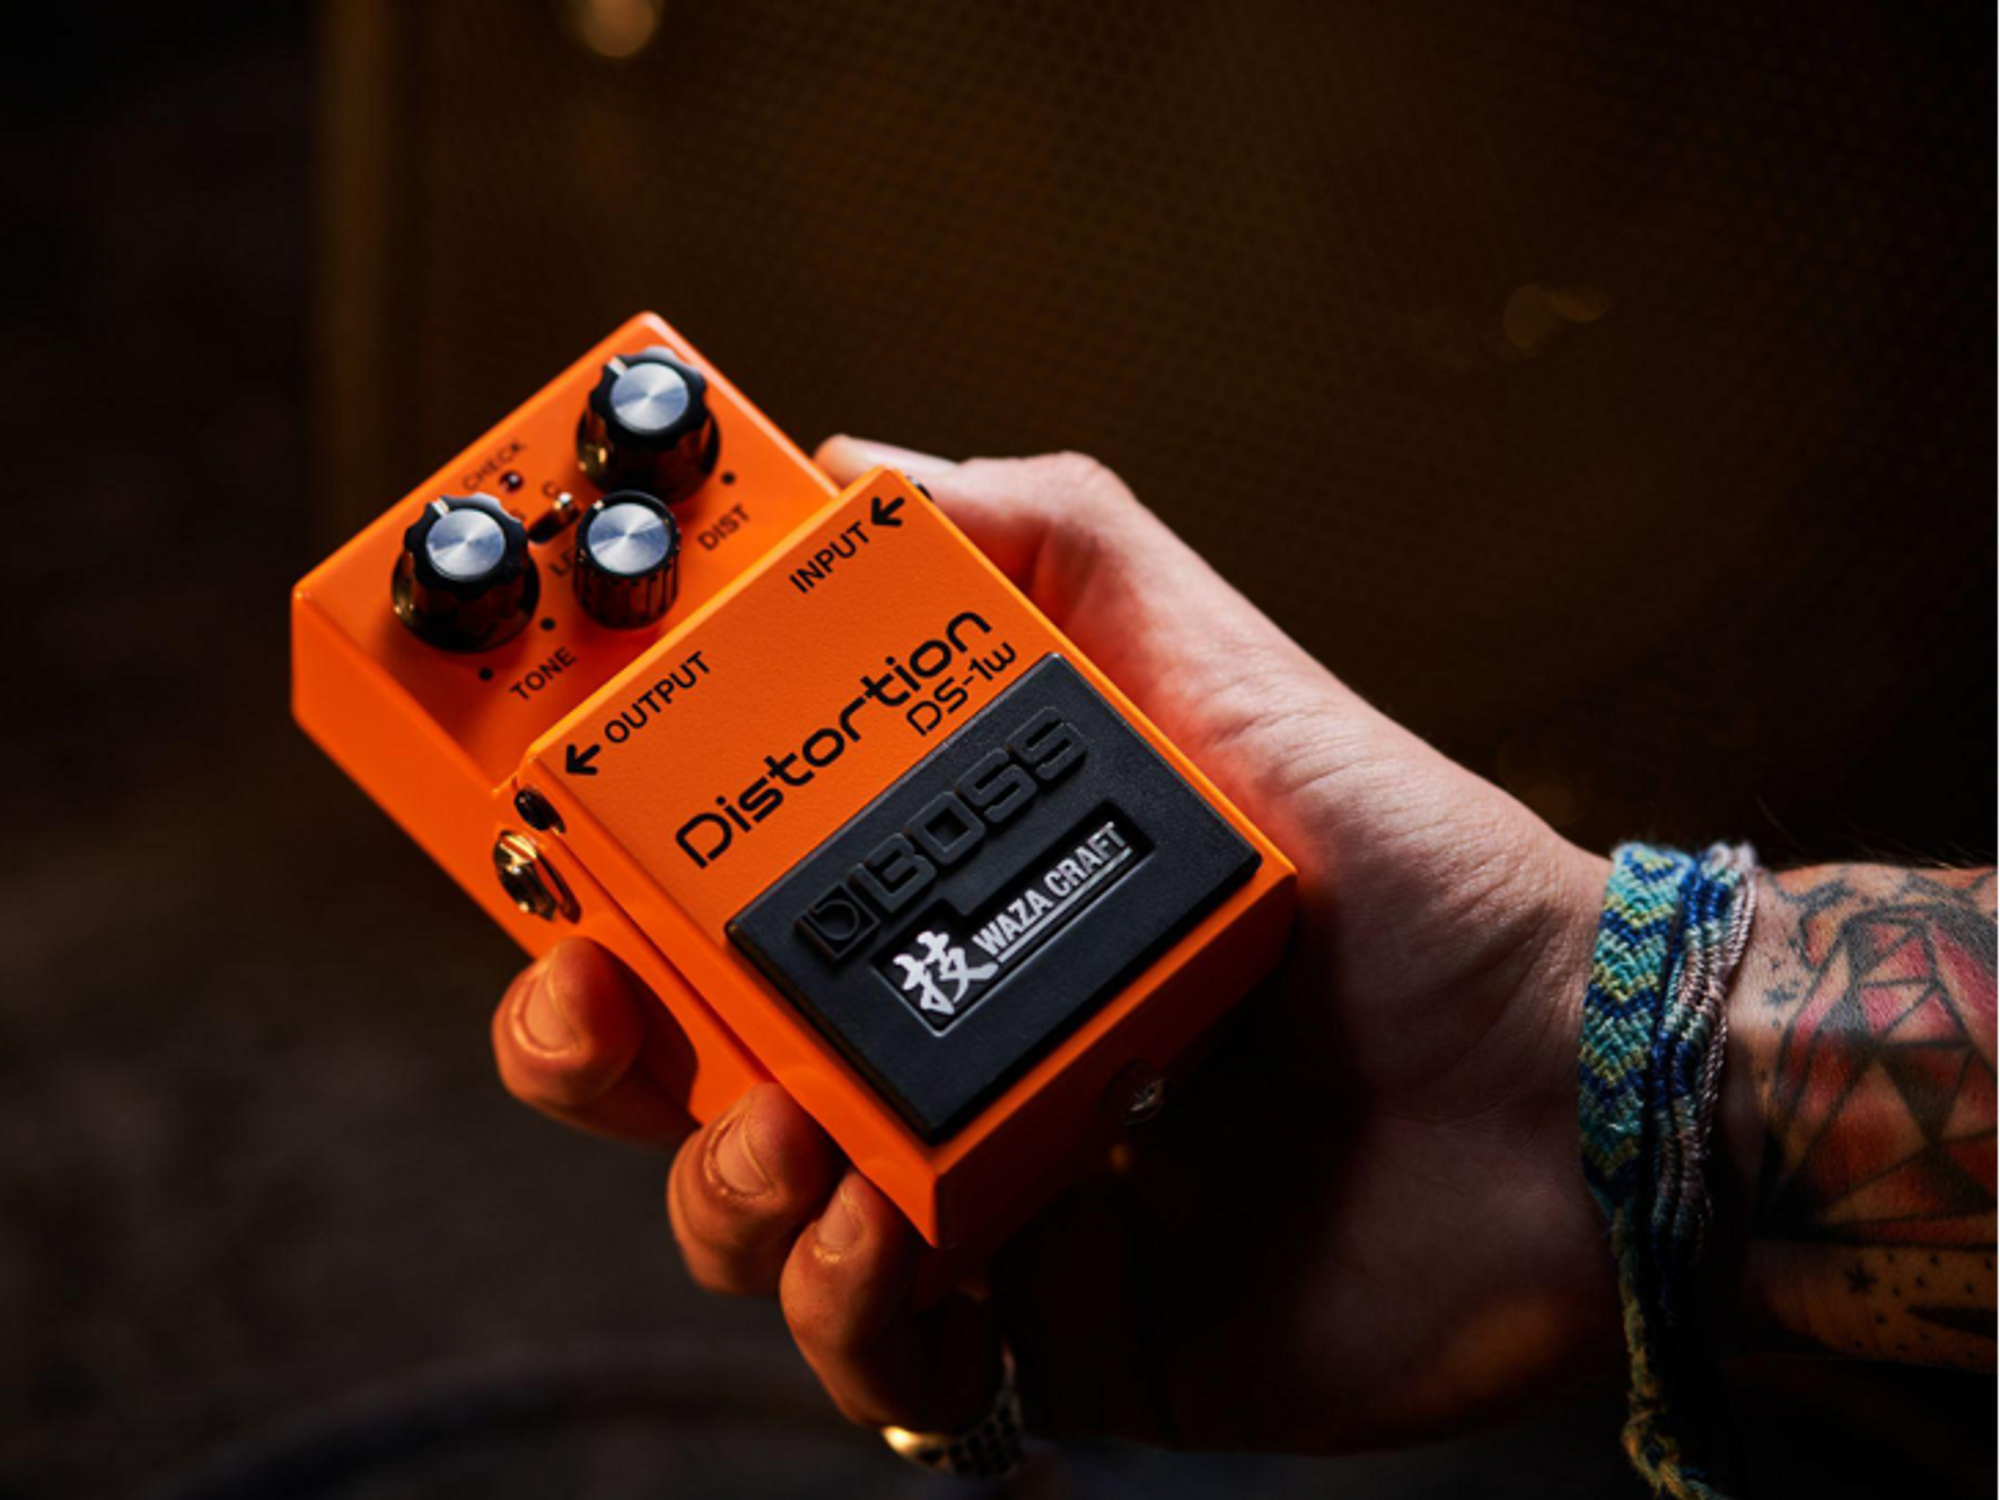 Boss Announces Revamped DS-1, the DS-1W Distortion